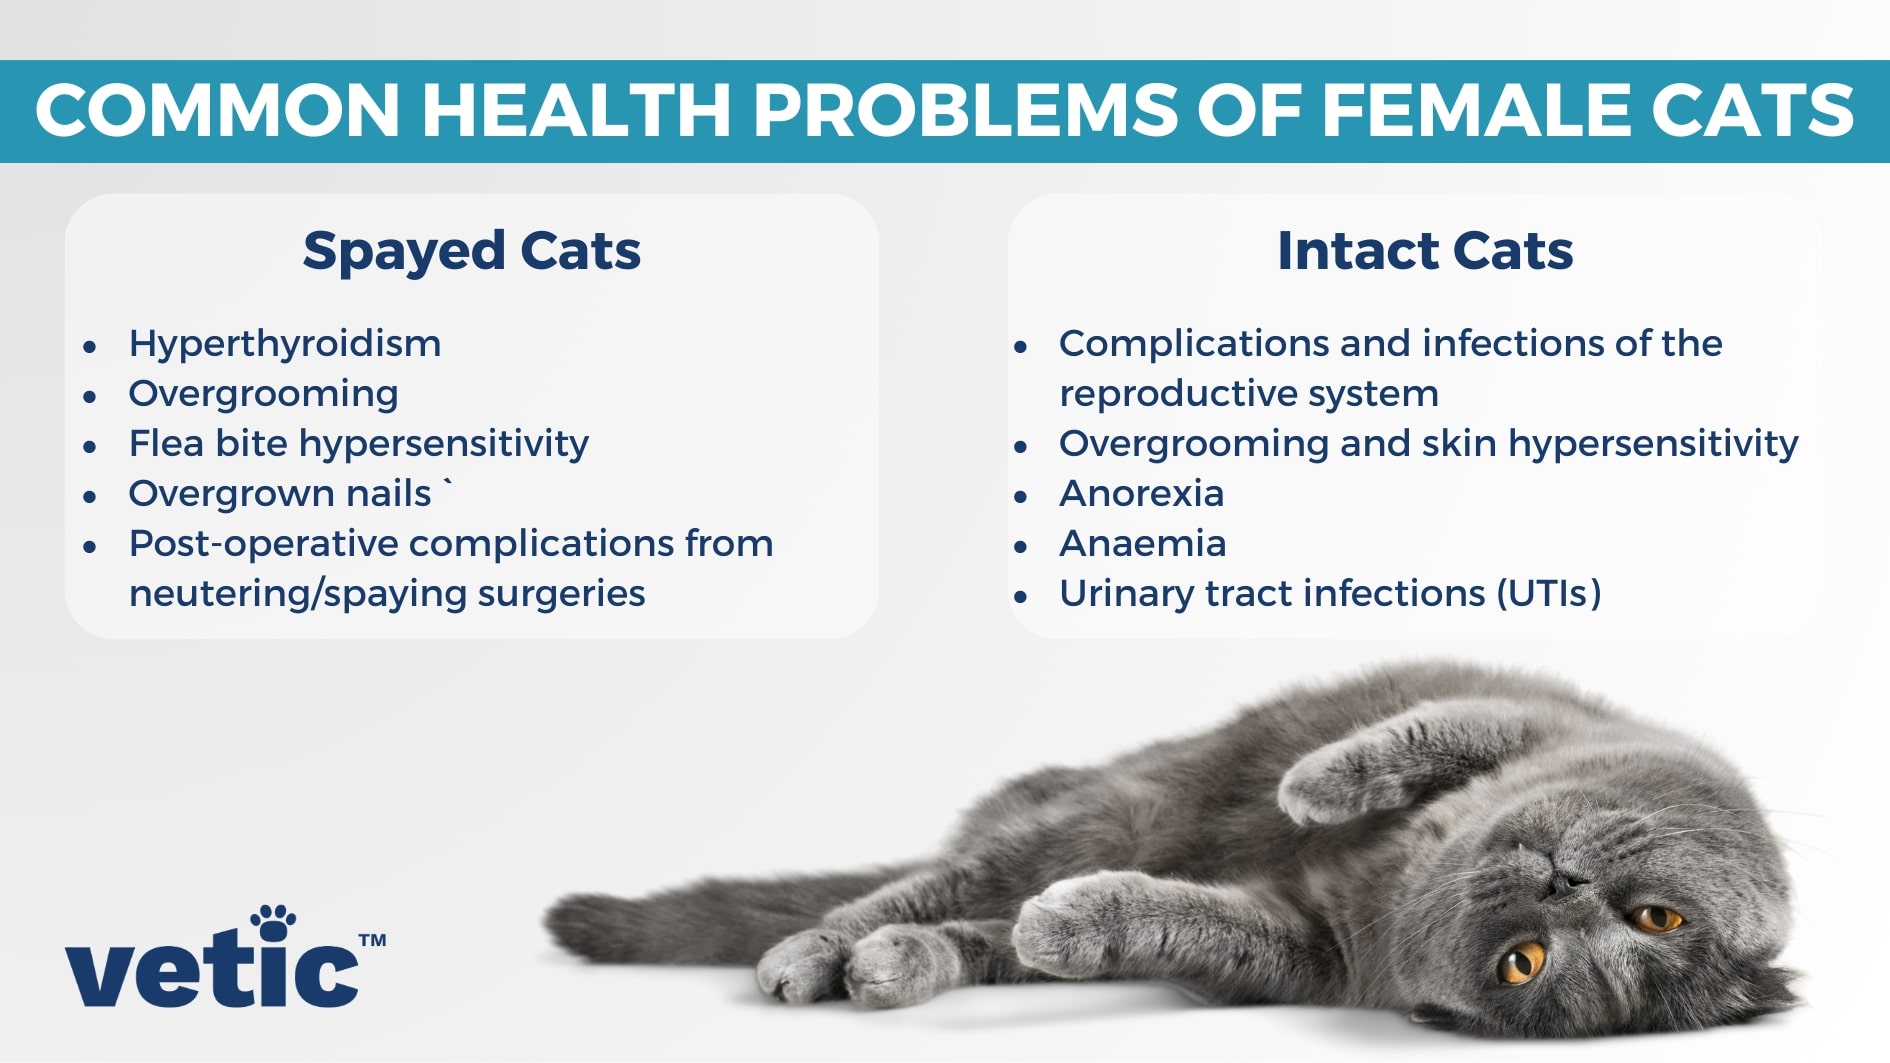 Infographic of "Common Health Problems of Female Cats" divided into two categories - common cat health problems in spayed females and intact queens